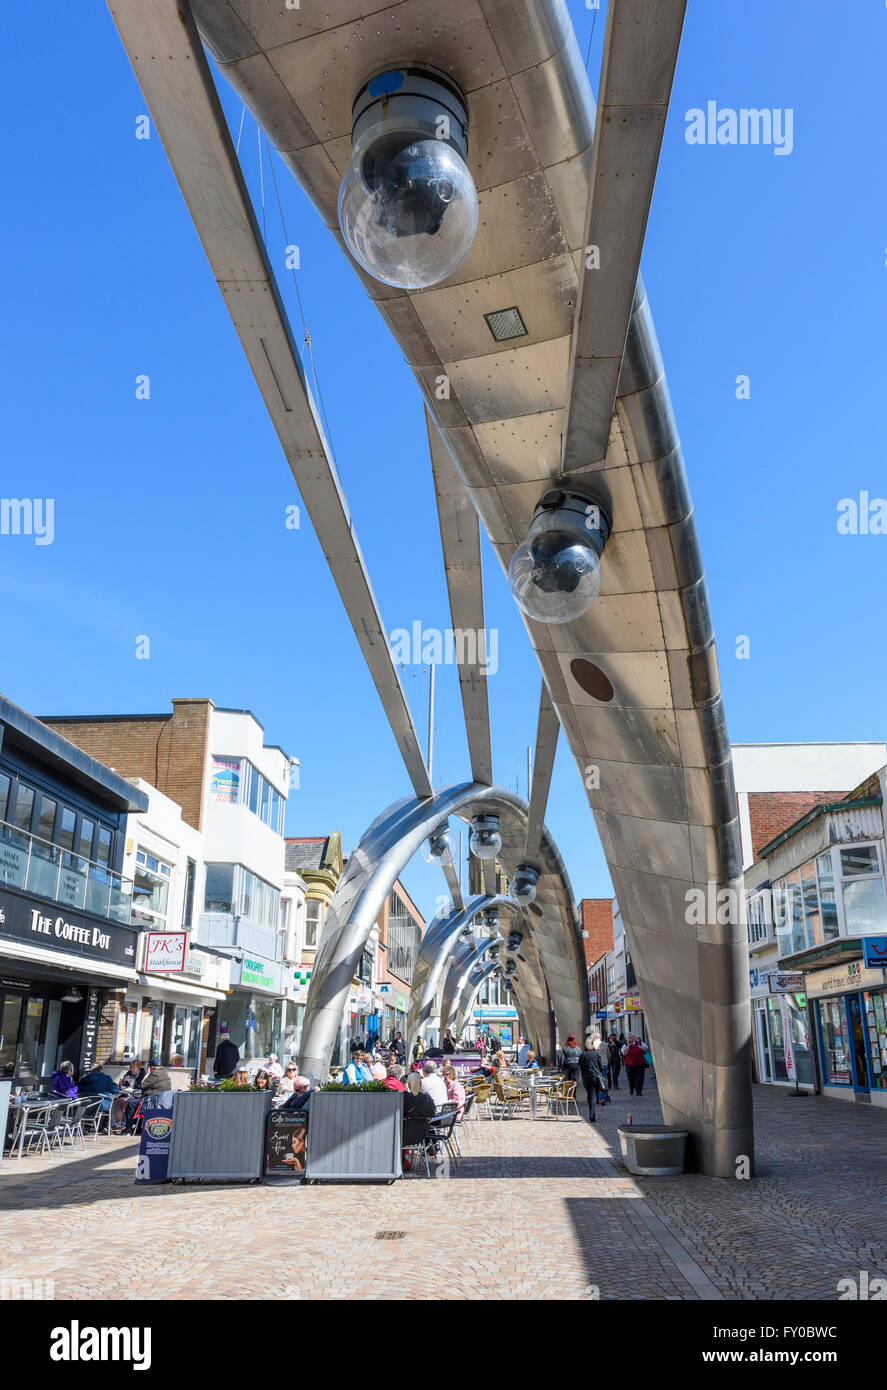 Under a blue sky, tourists drink and eat at cafés in Church Street, Blackpool famous for it's very modern street lighting Stock Photo